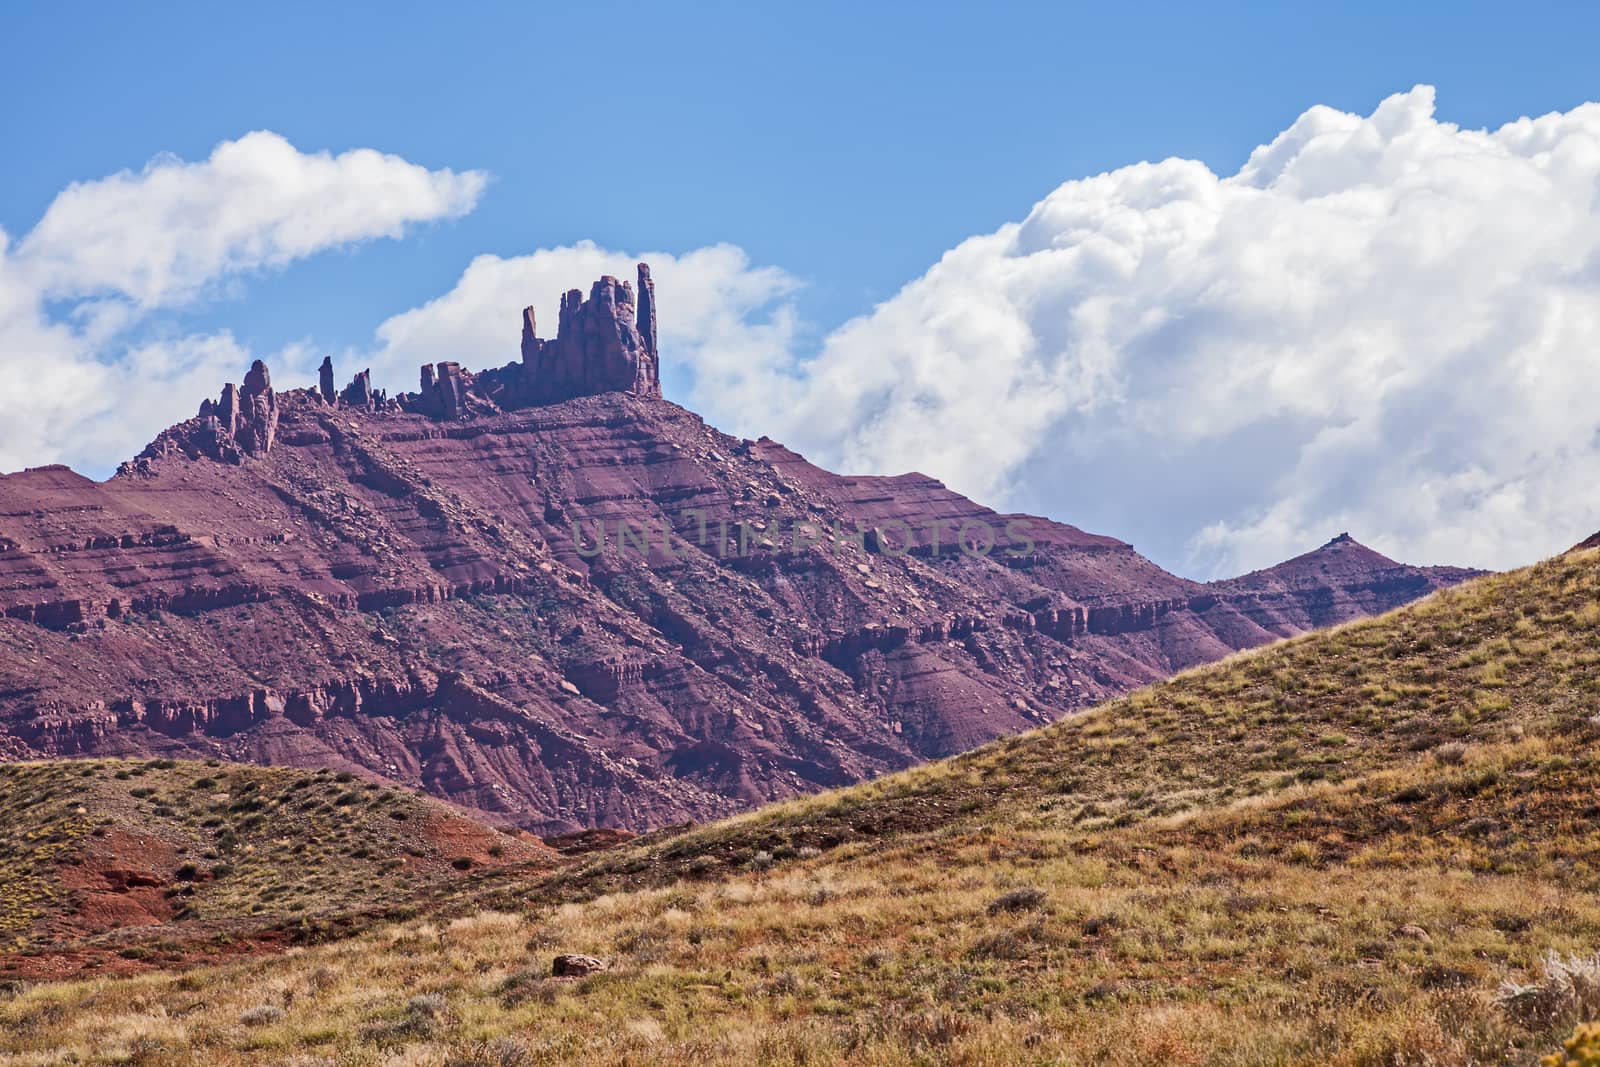 The Fisher Towers seen from Route 128 near Moab, Utah